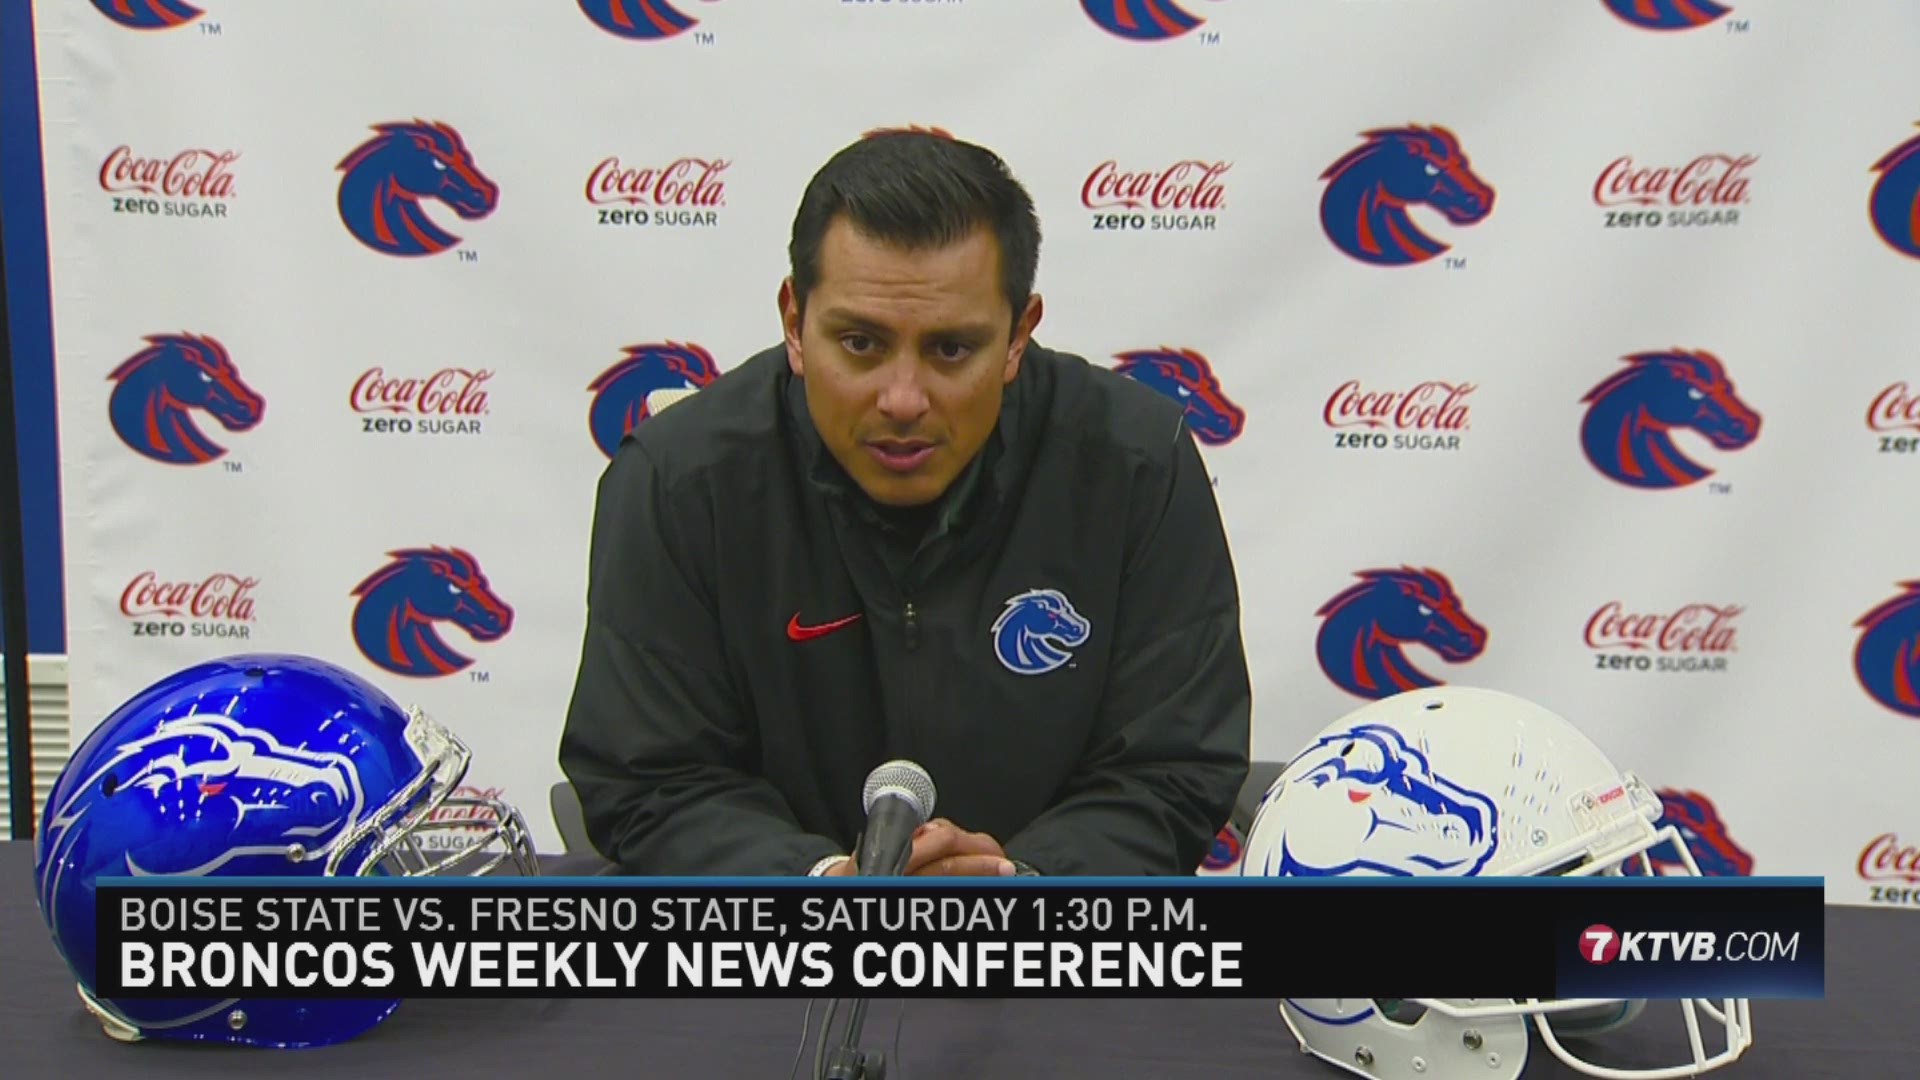 Boise State defensive coordinator Andy Avalos discusses the matchup with Fresno State, and the rivalry between the teams.